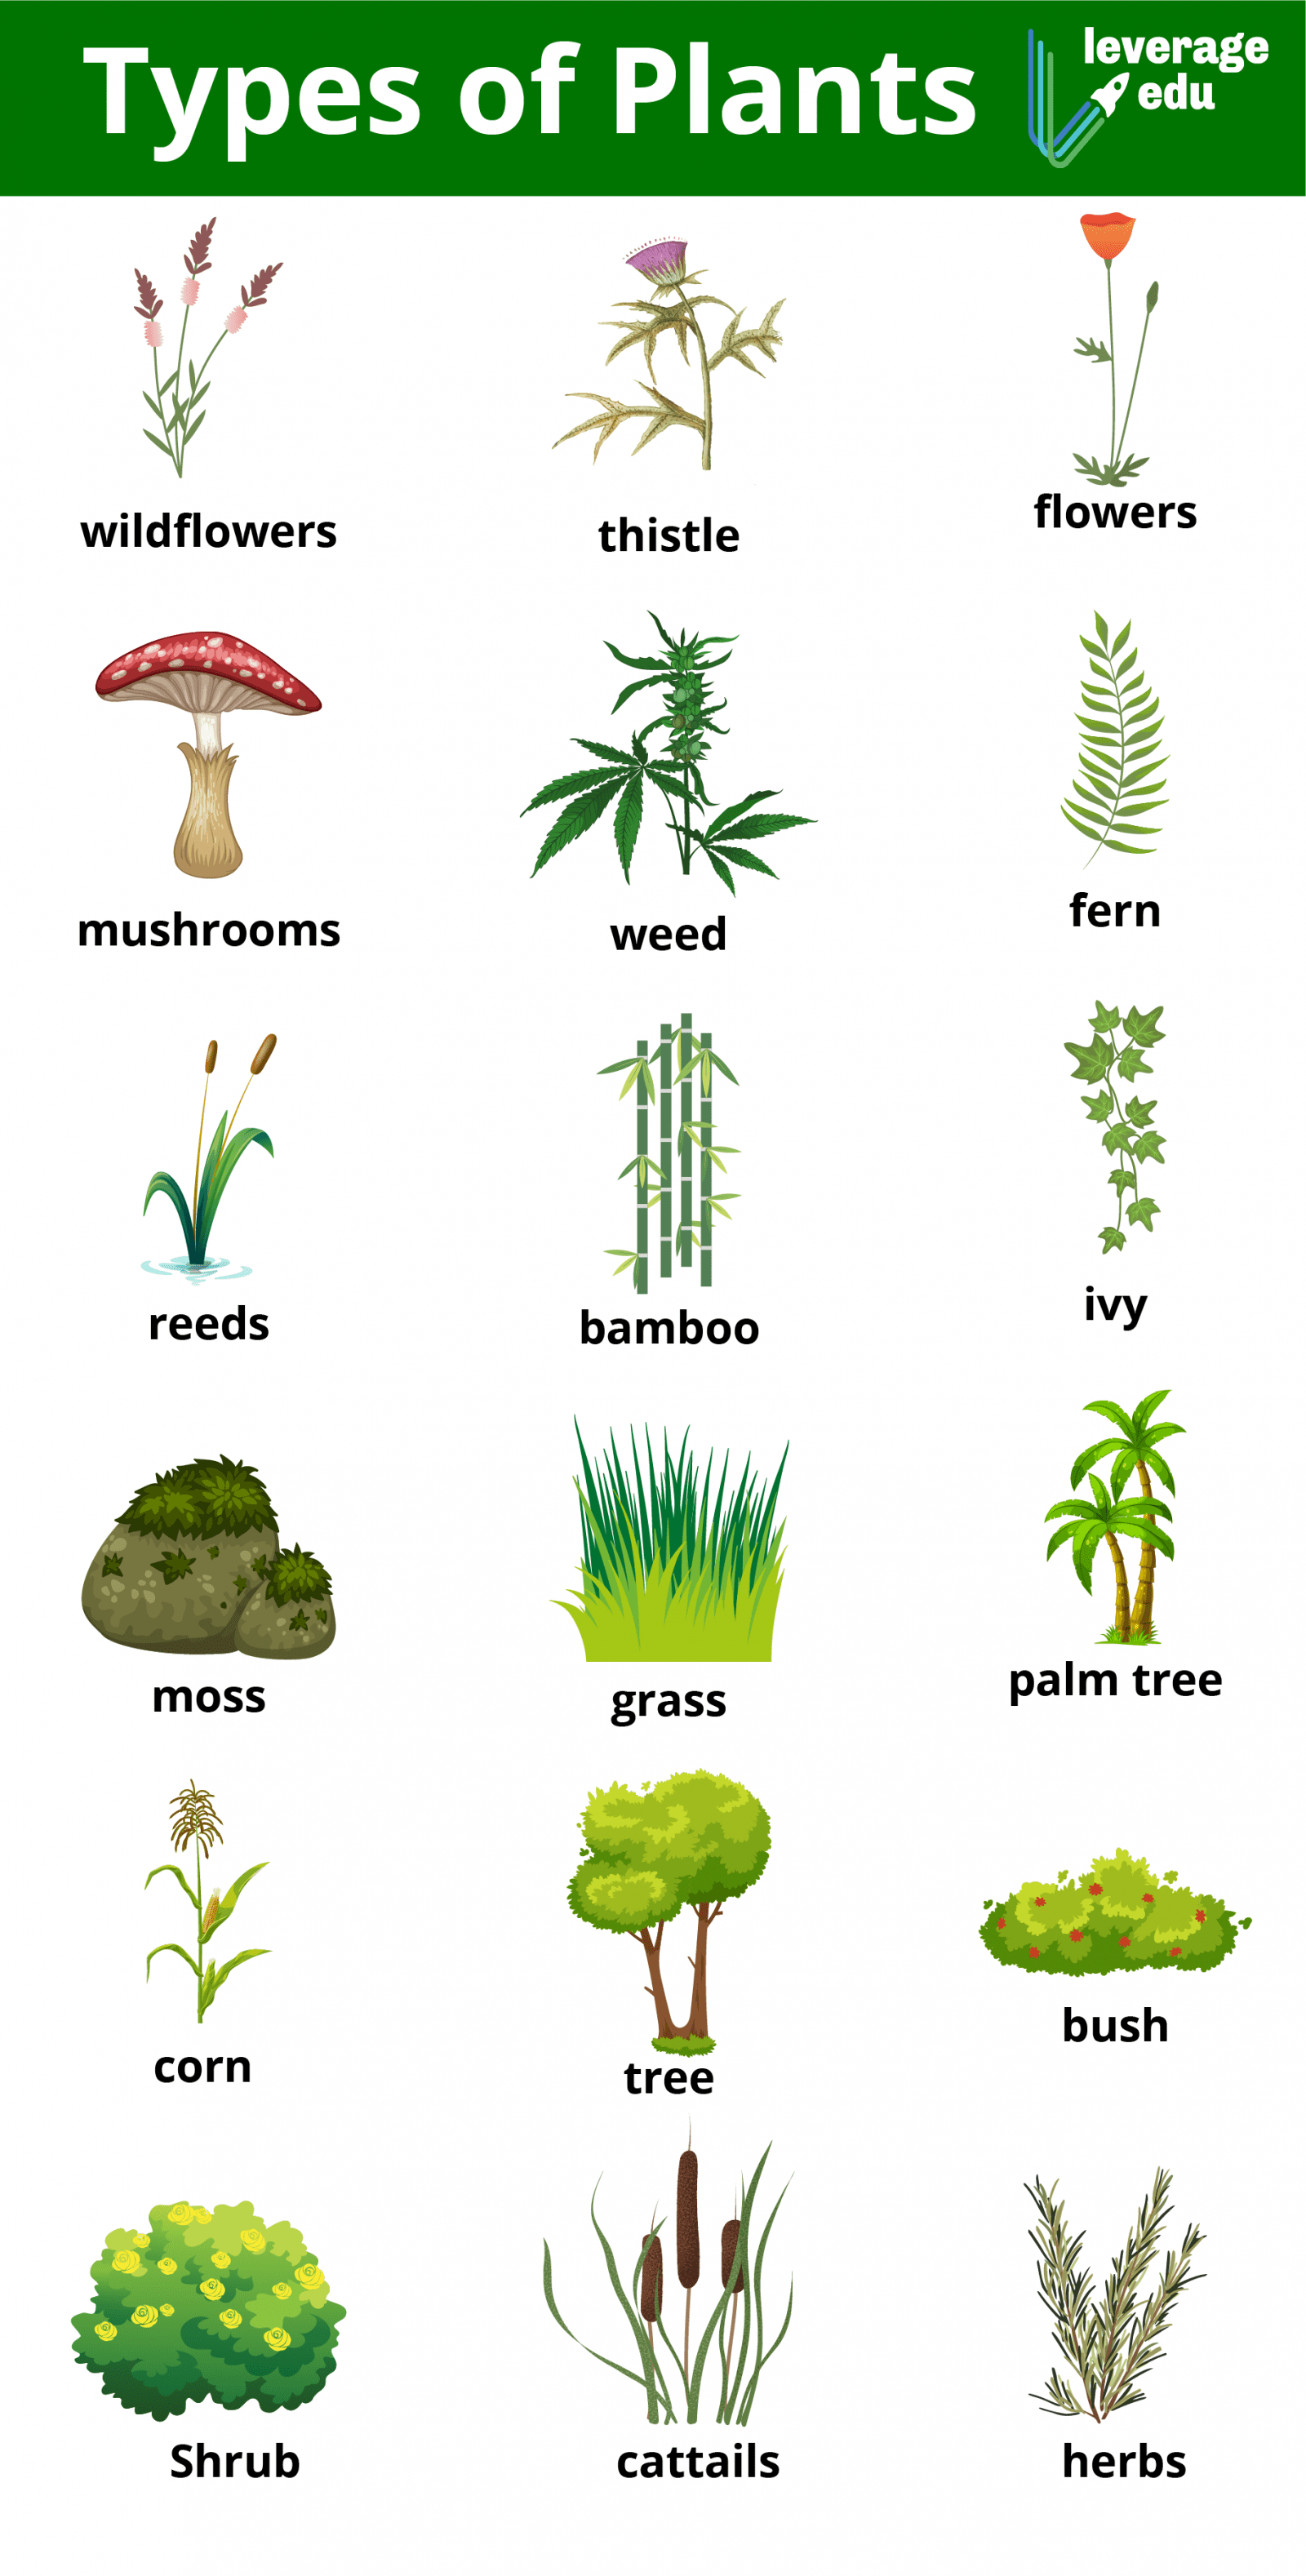 Different Types of Plants: By Life Cycle, Seeds & Size - Leverage Edu